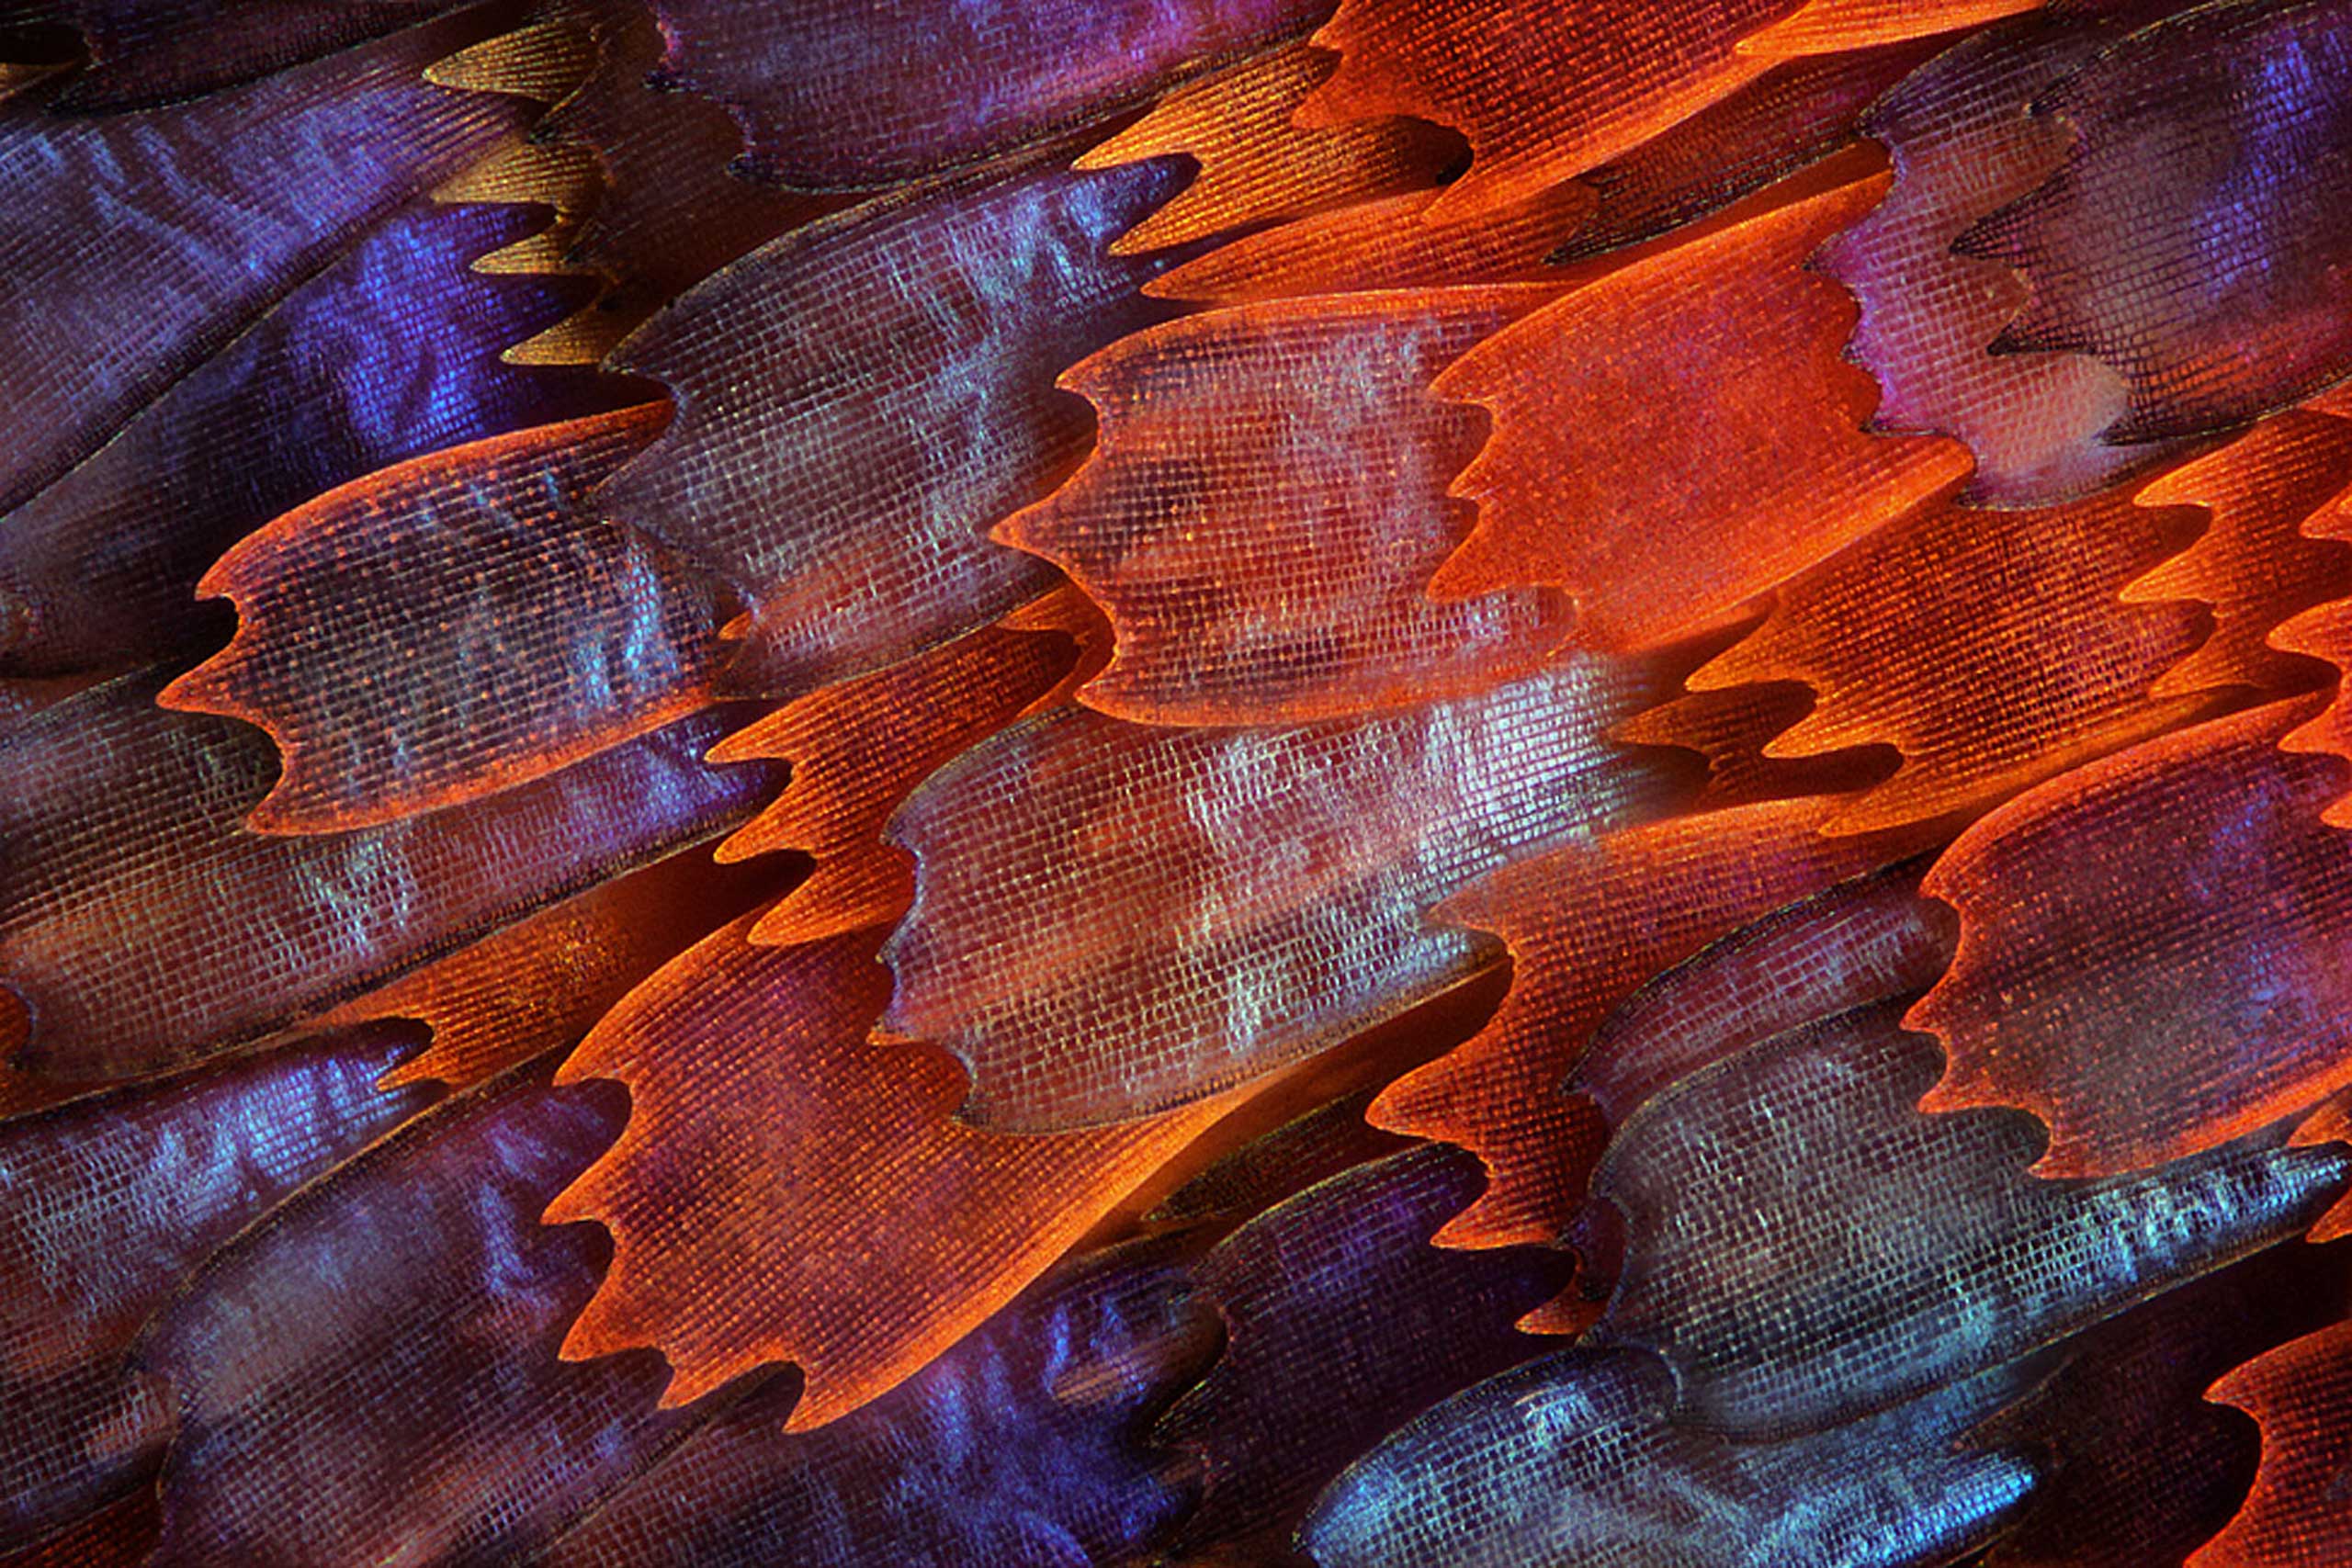 10th place: Scales on a butterfly wing